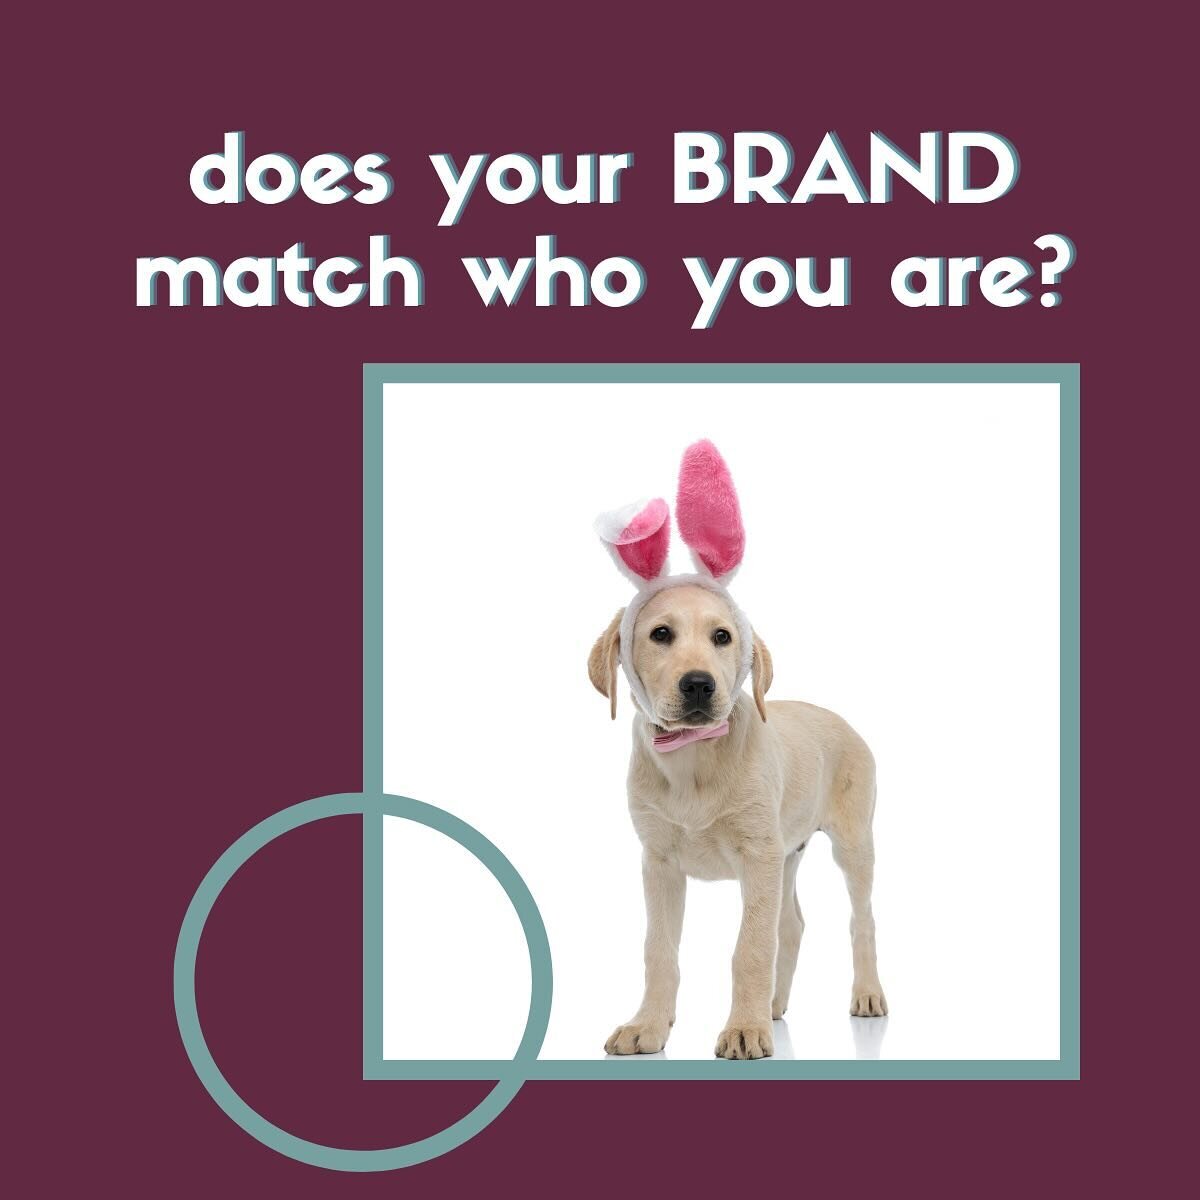 You may have come up with some colors or content that you thought matched your brand, but have you evolved? It might be time for a brand evolution too. When I work with people on their brands, we often discover there was a look they liked for their b